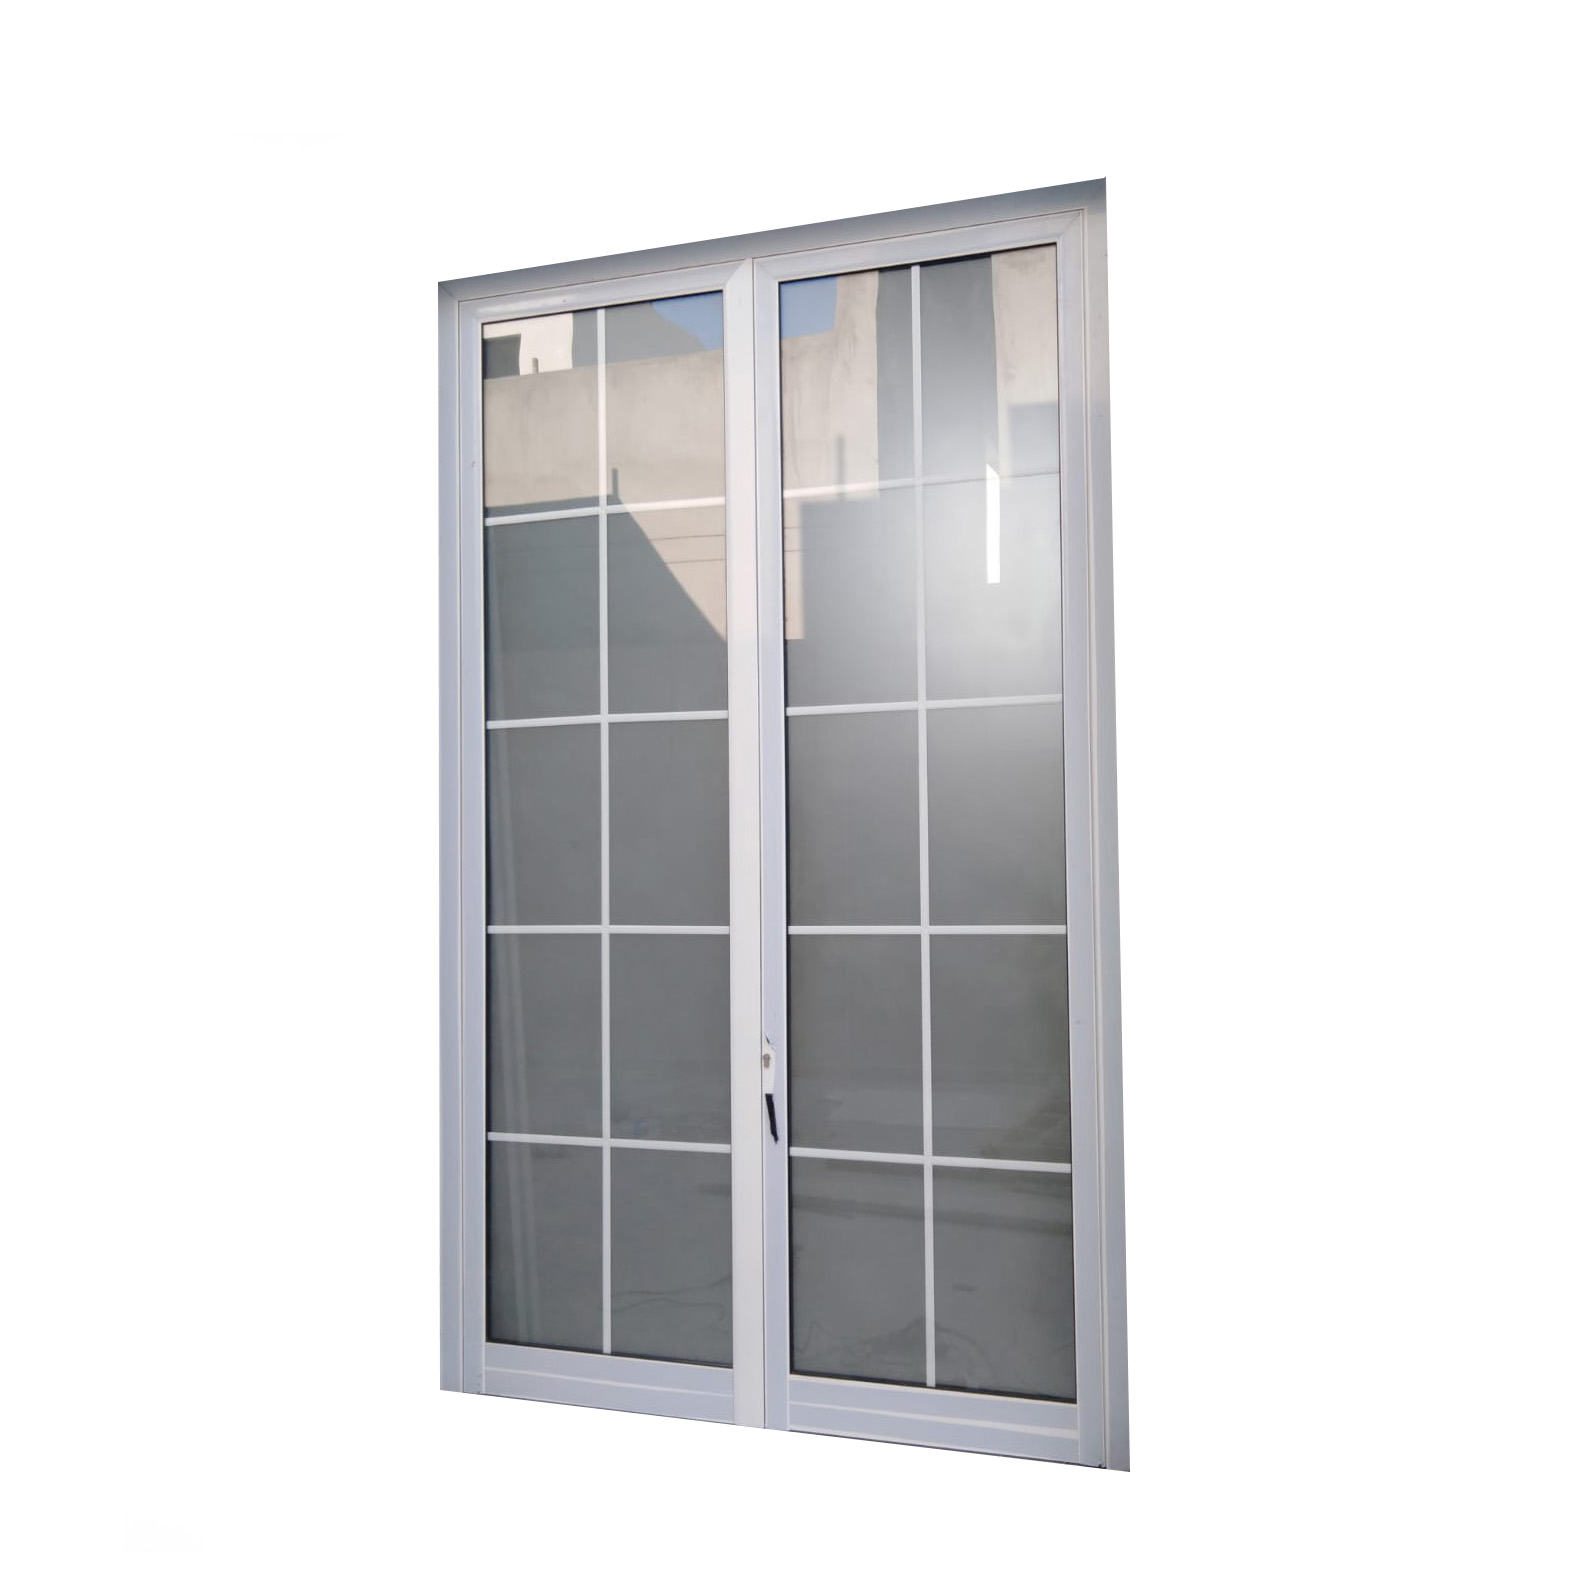 Buy White Frame Double Door Online | Manufacturing Production Services | Qetaat.com